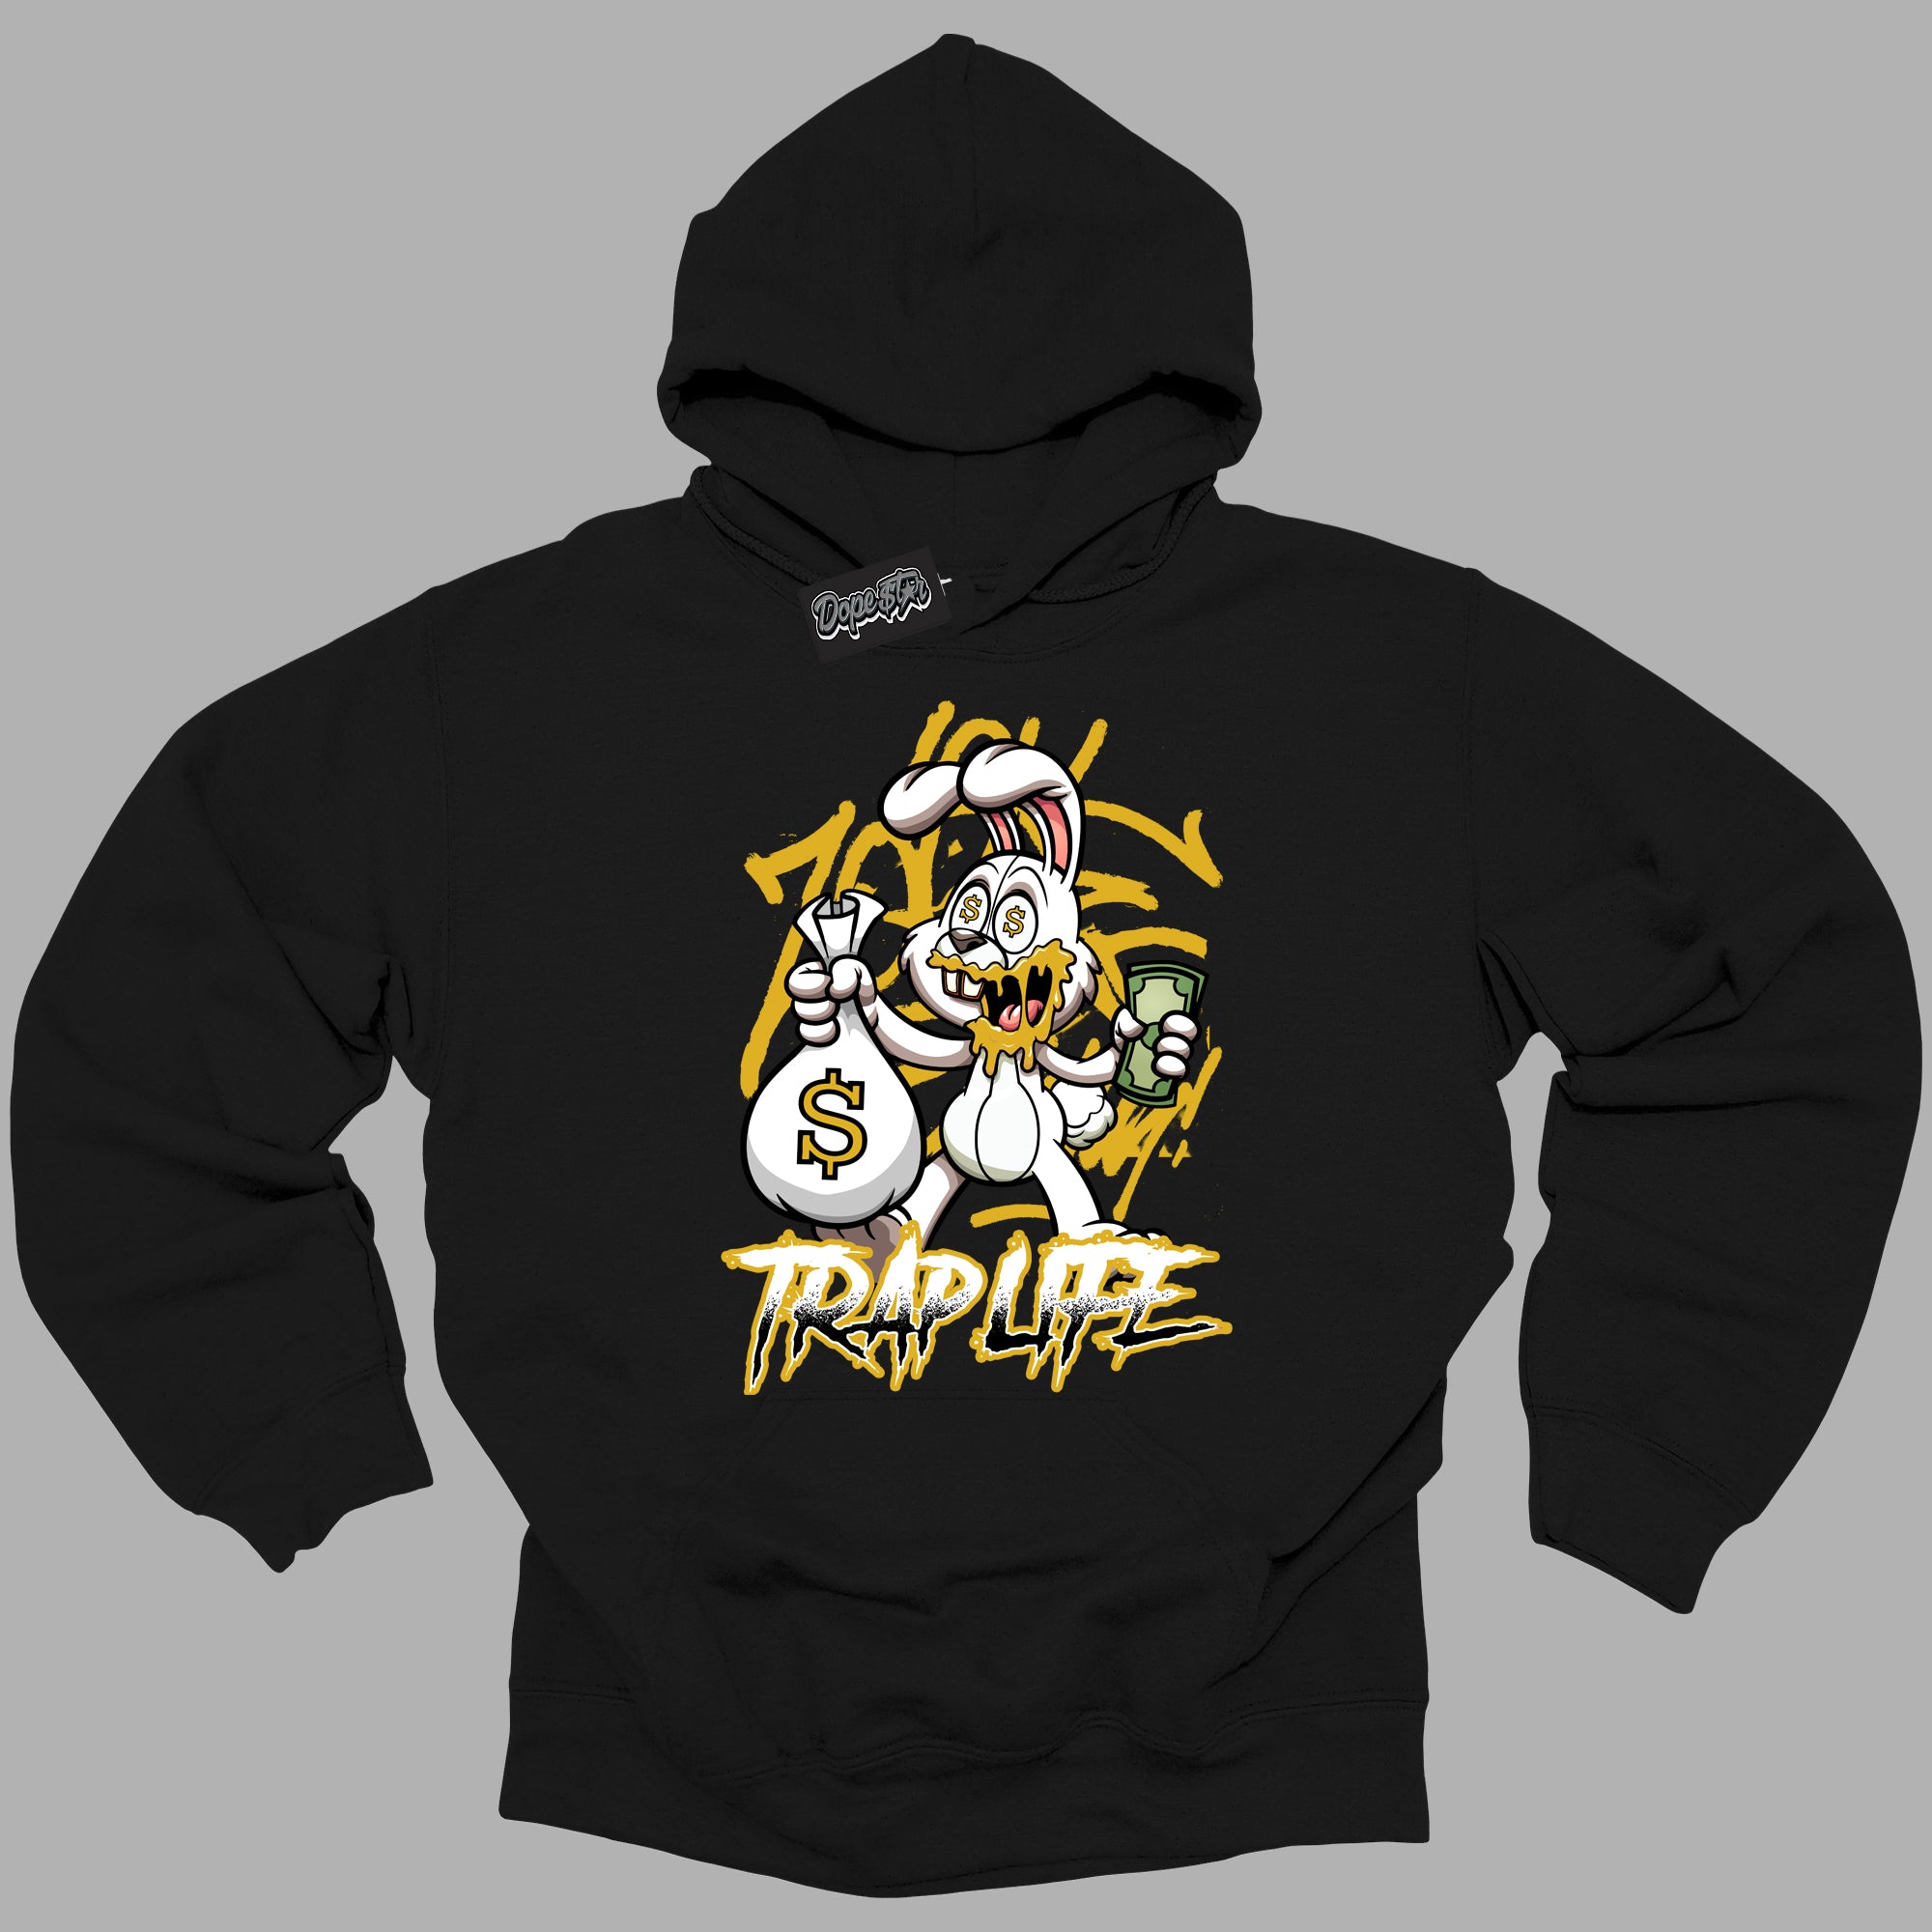 Cool Black Hoodie with “ Trap Rabbit ”  design that Perfectly Matches Yellow Ochre 6s Sneakers.